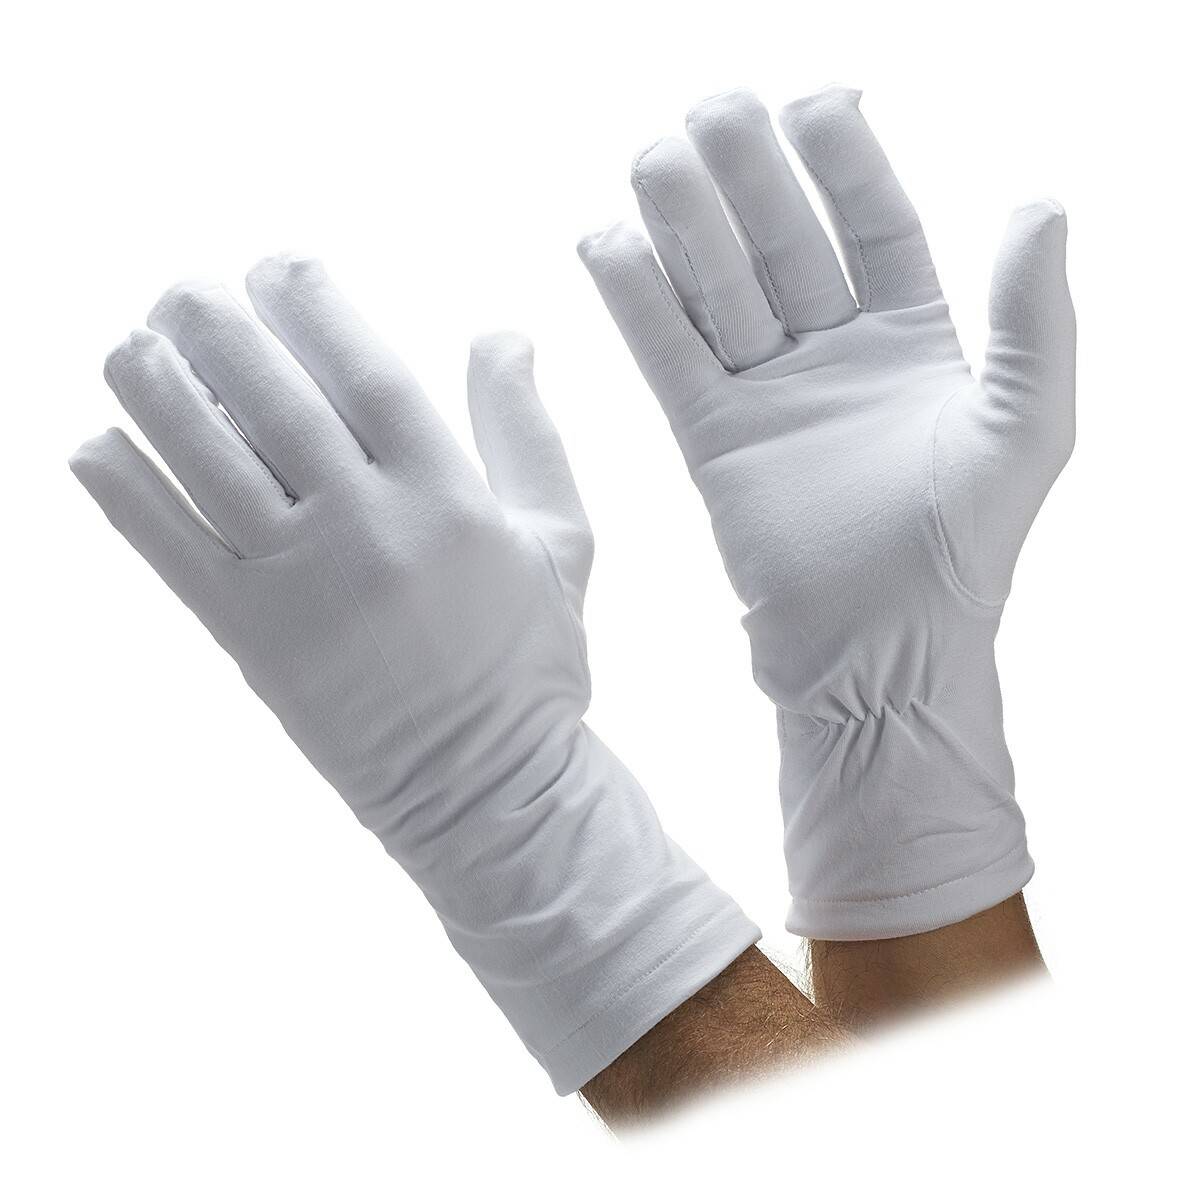 Extra Long Cotton Gloves Black or White